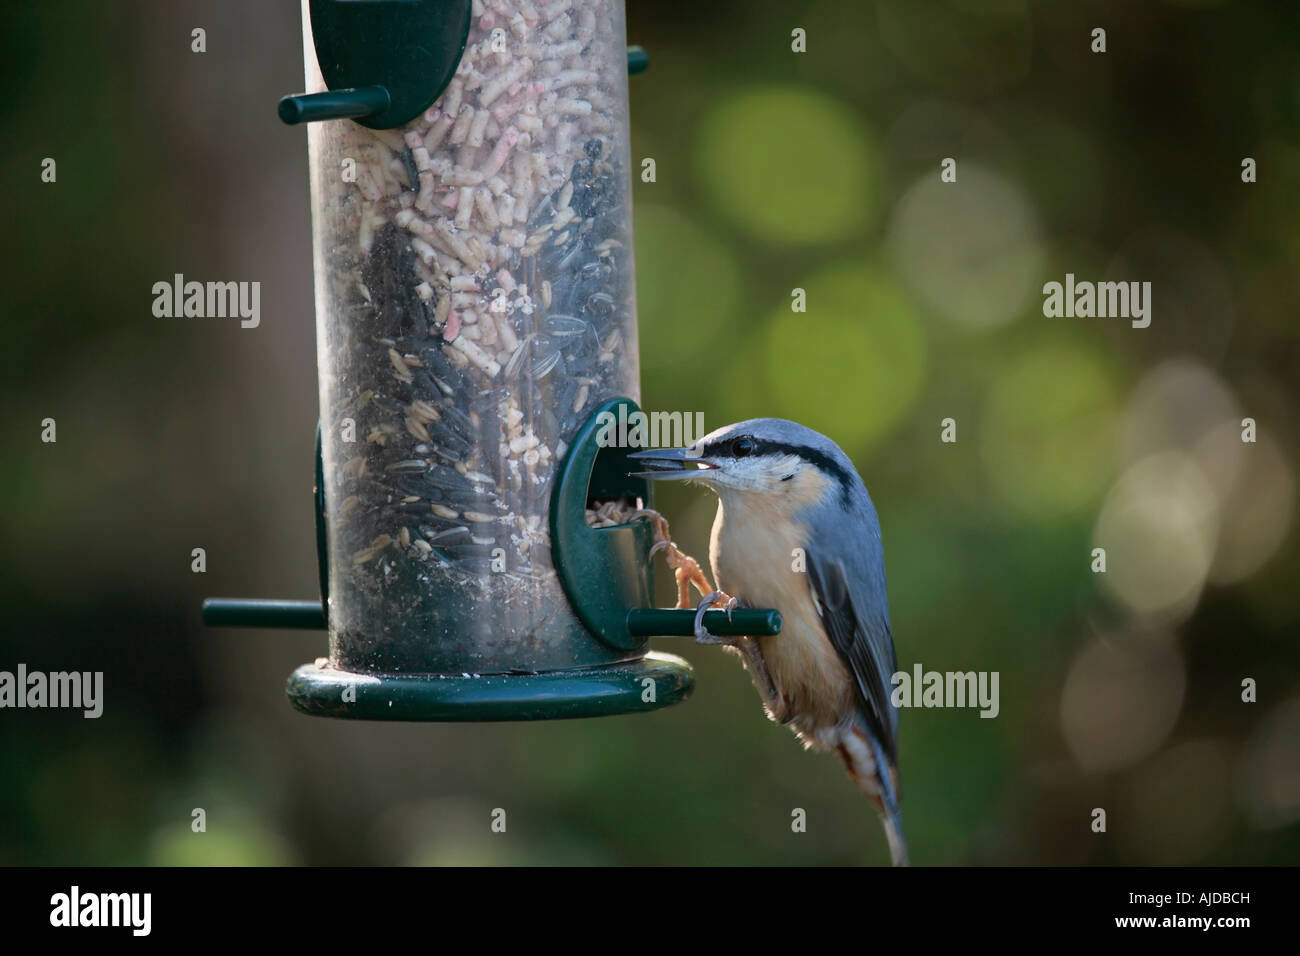 Close up of a single Nuthatch (Sitta europaea) taking seed from bird feeder in garden Stock Photo